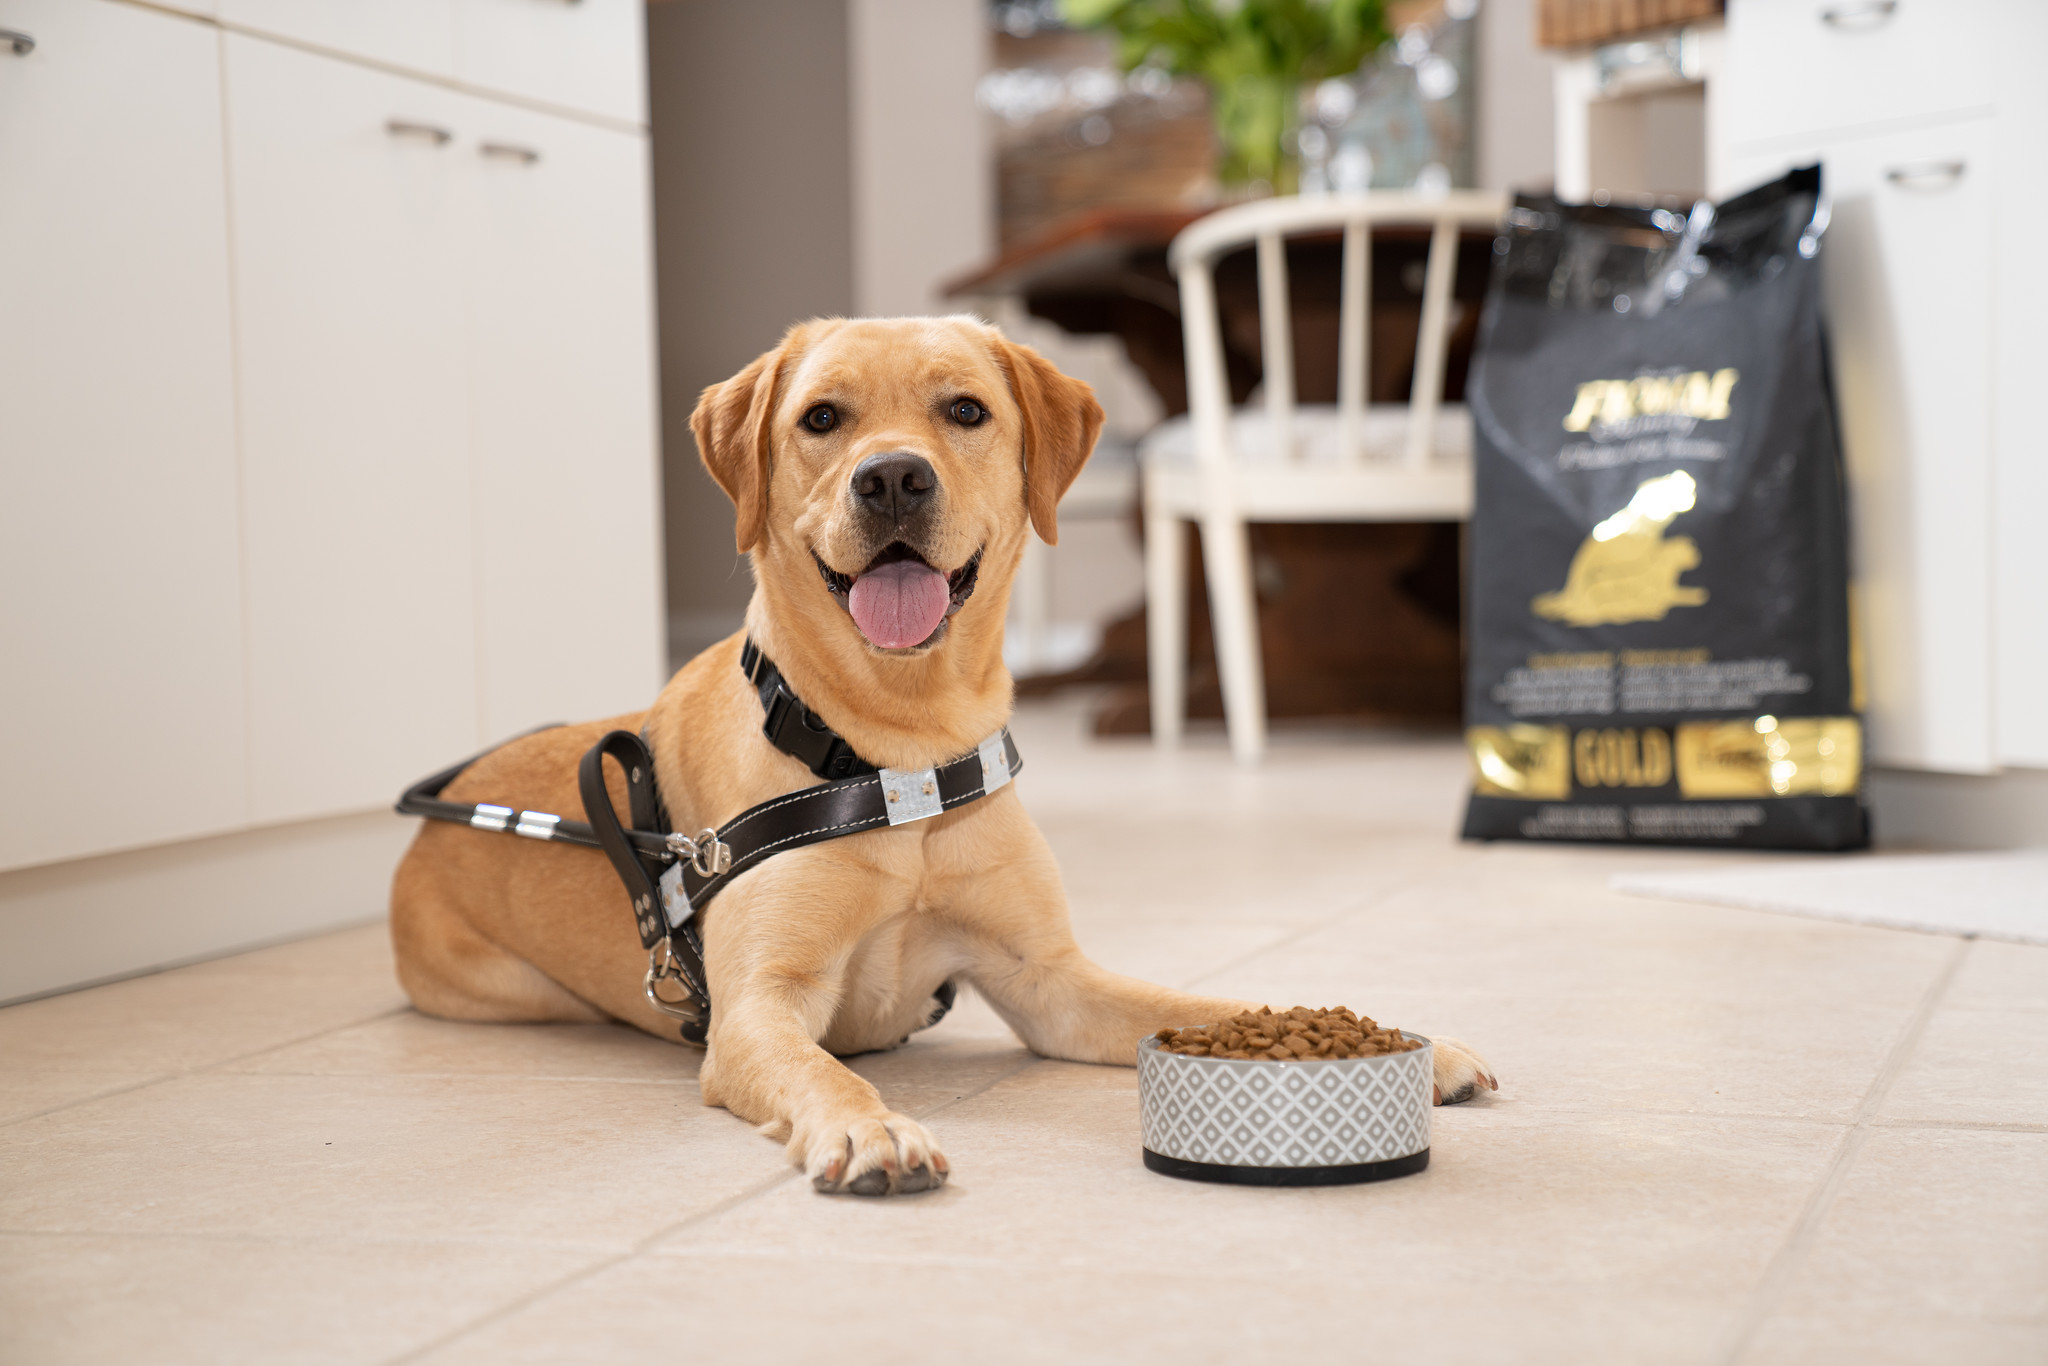 A yellow lab in a guide dog harness lays next to a bowl of Fromm dog food